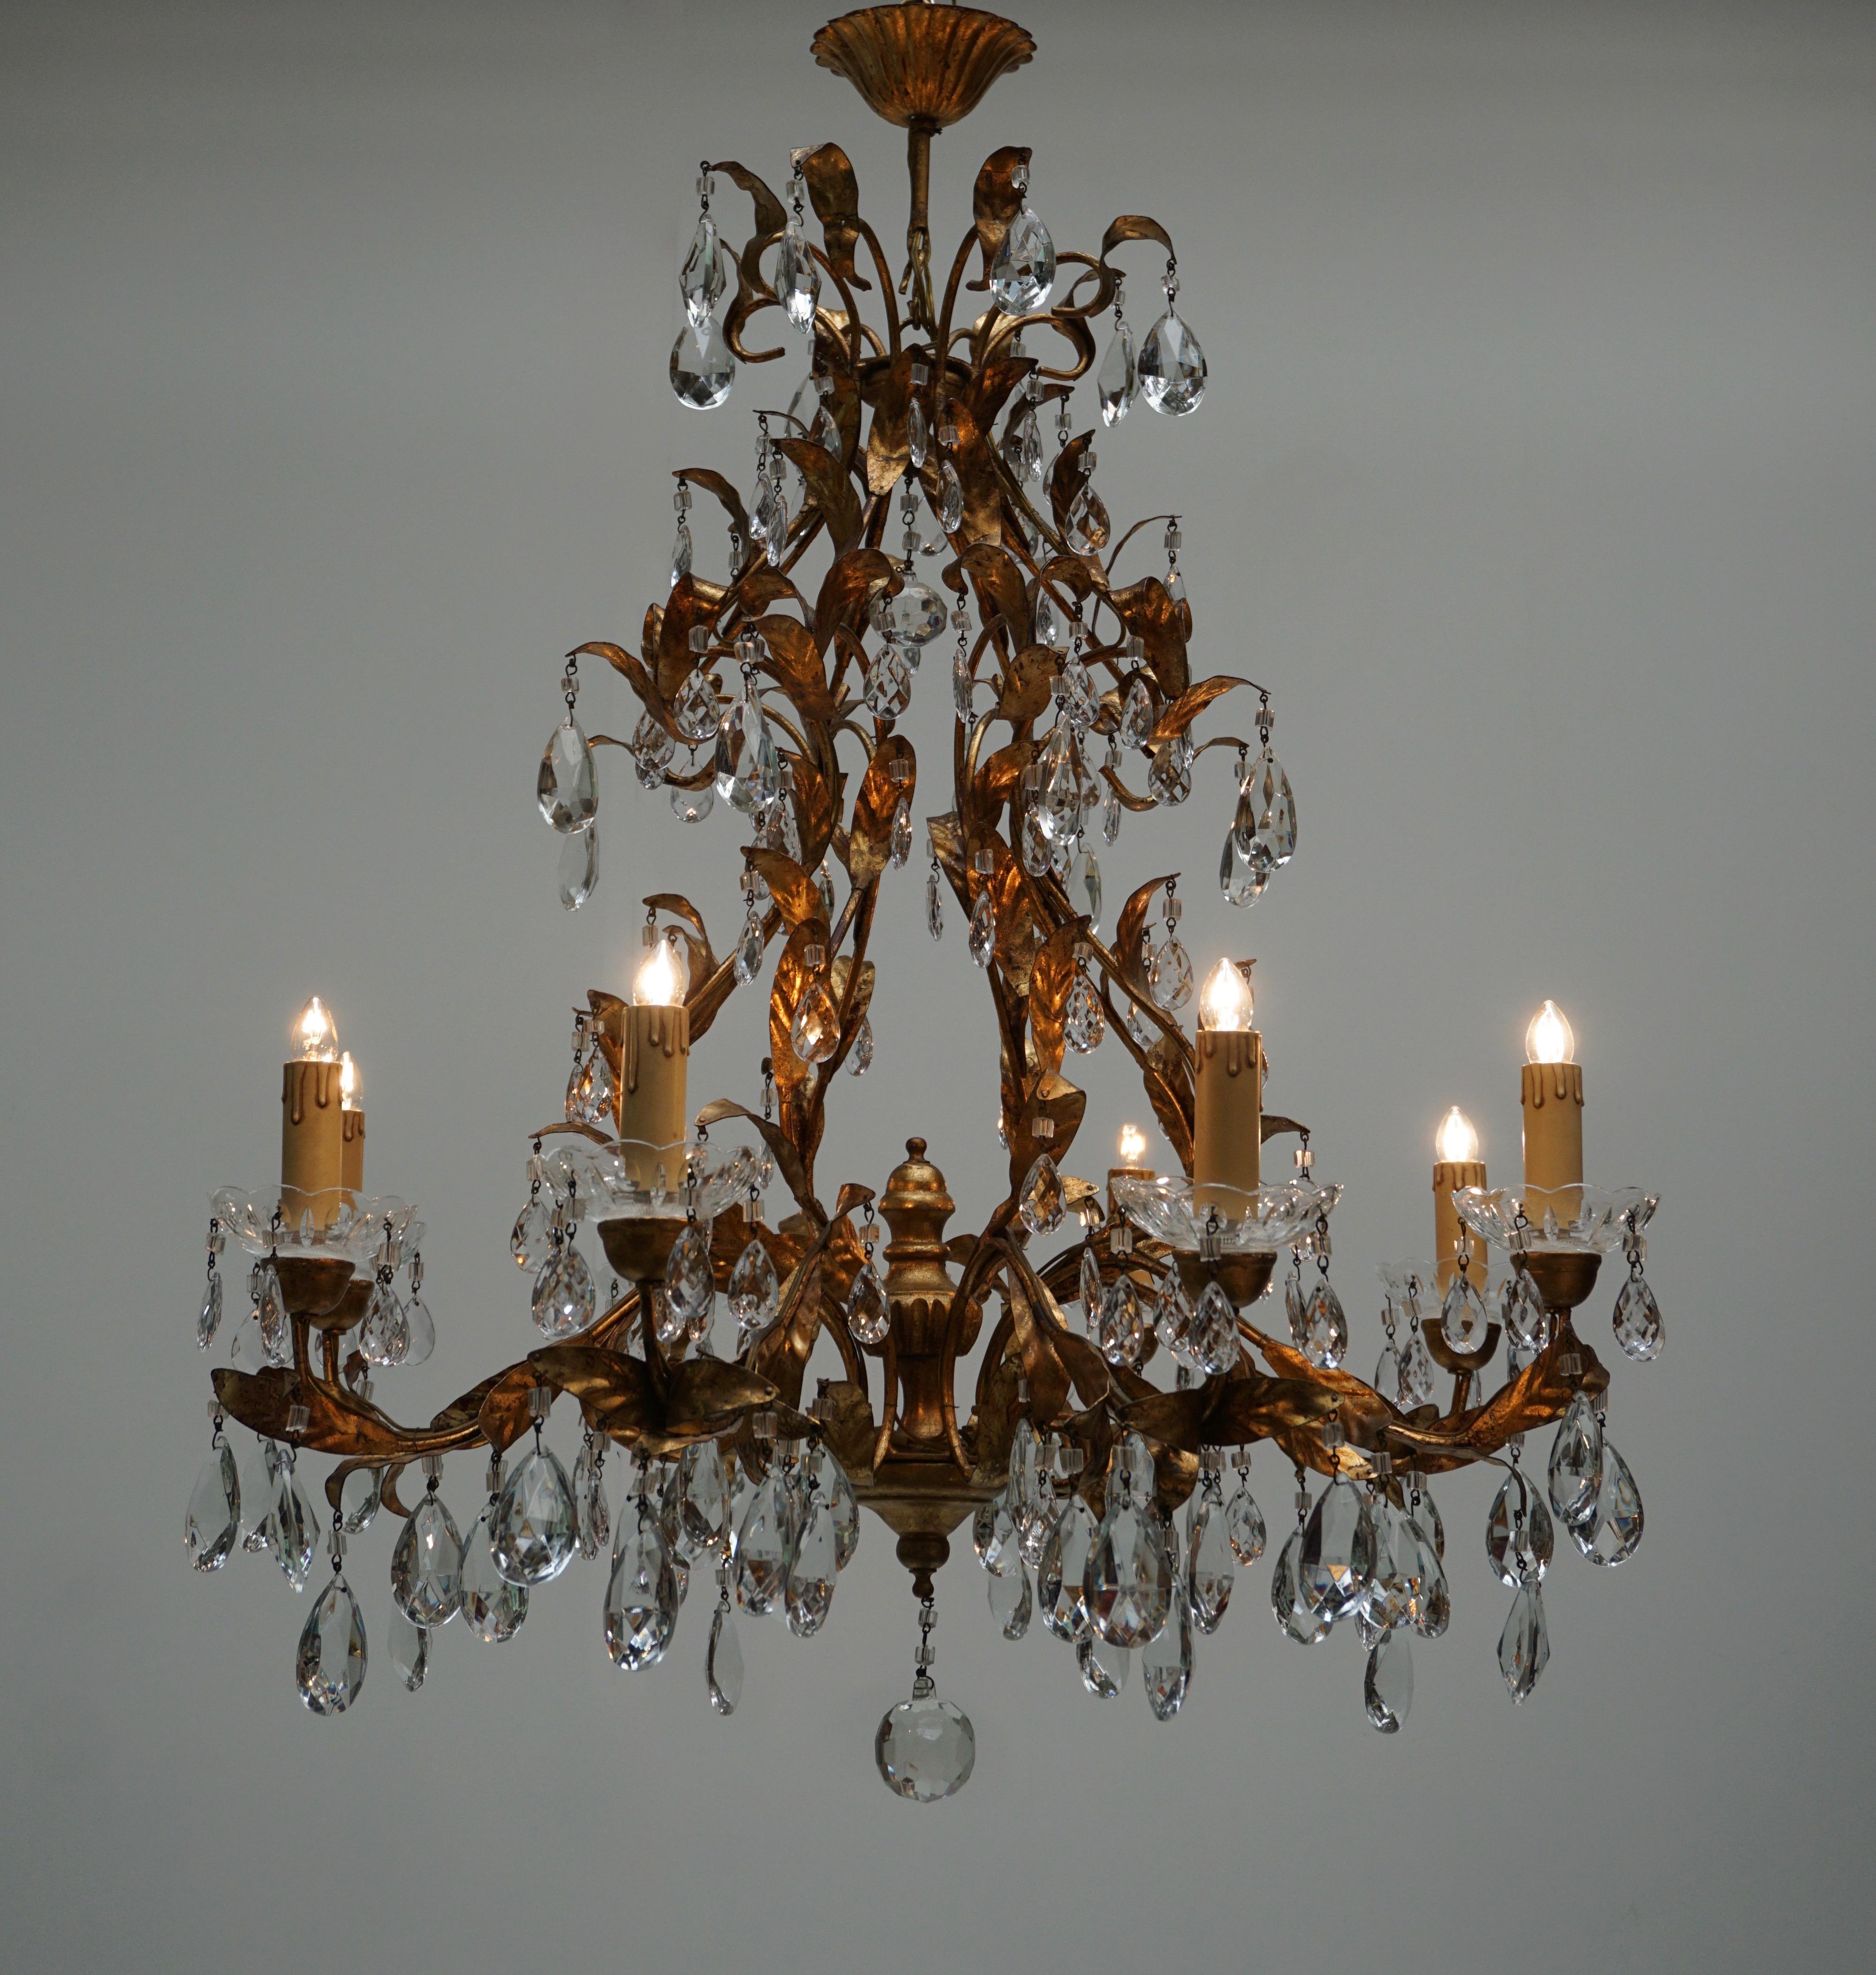 Stunning large brass eighty-light, Italian chandelier with leaves and crystal.
Measures: Diameter 77 cm. Height fixture 84 cm. Total height with the chain 93 cm.
Eight E14 bulbs.